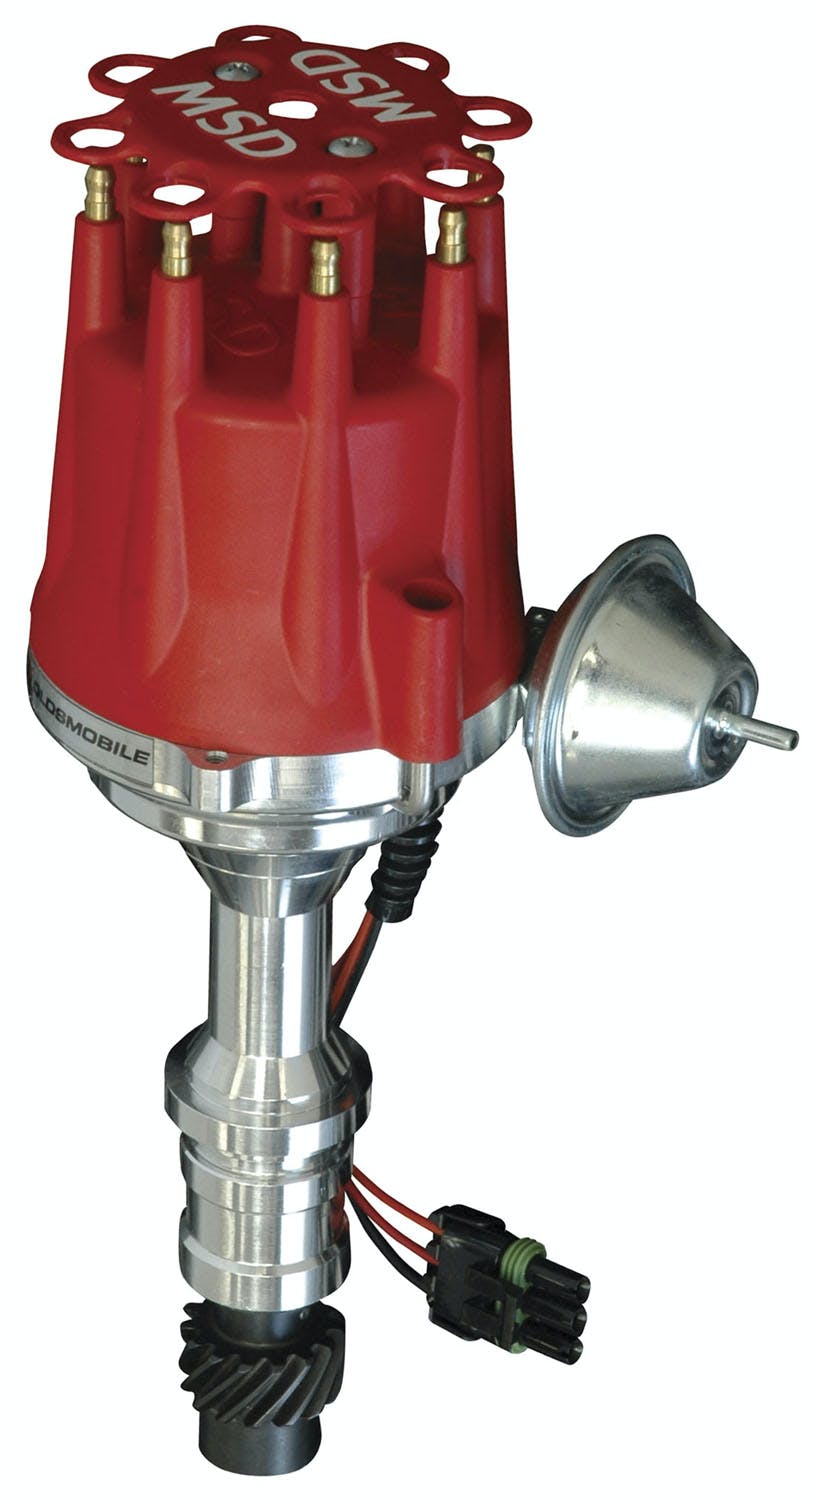 HEI Distributor - Oldsmobile with powerful and stable spark!